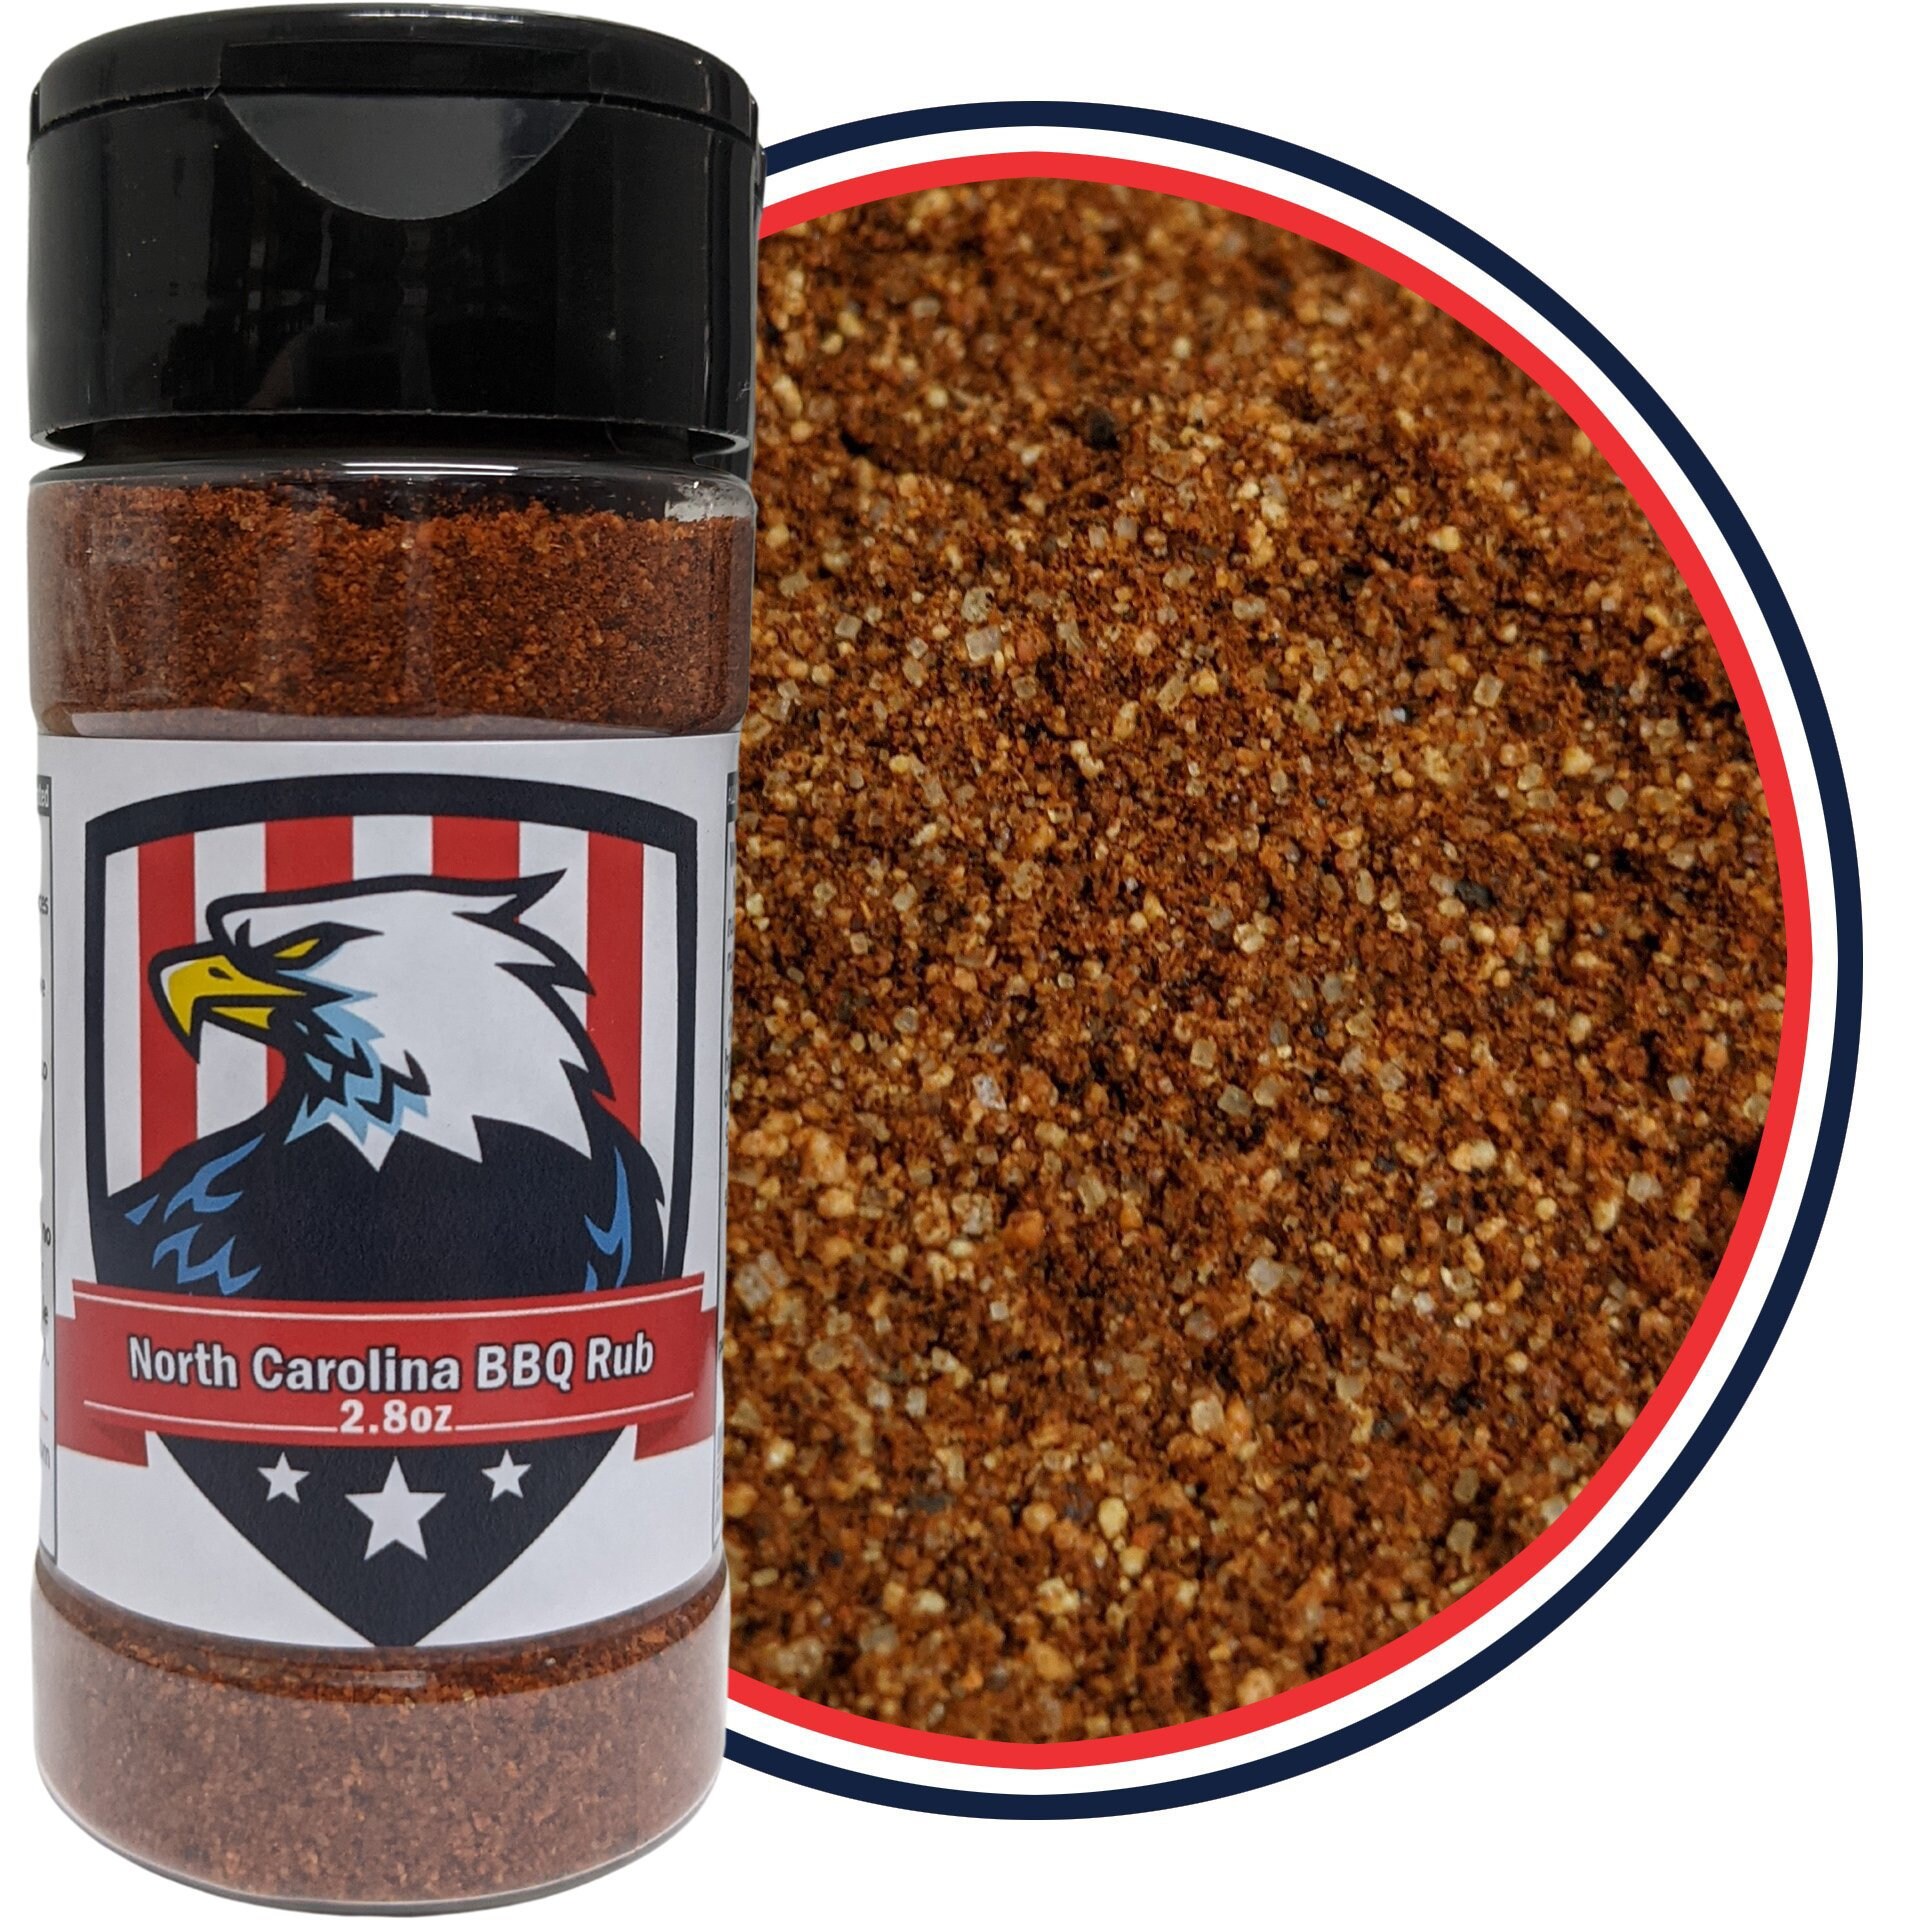 RubWise Texas Style BBQ Rub Gift Set | Meat Dry Rub Spices and Seasoning  Sets Variety Pack | Smoking & Grilling Gifts for Men | 6 x 1lb bags 